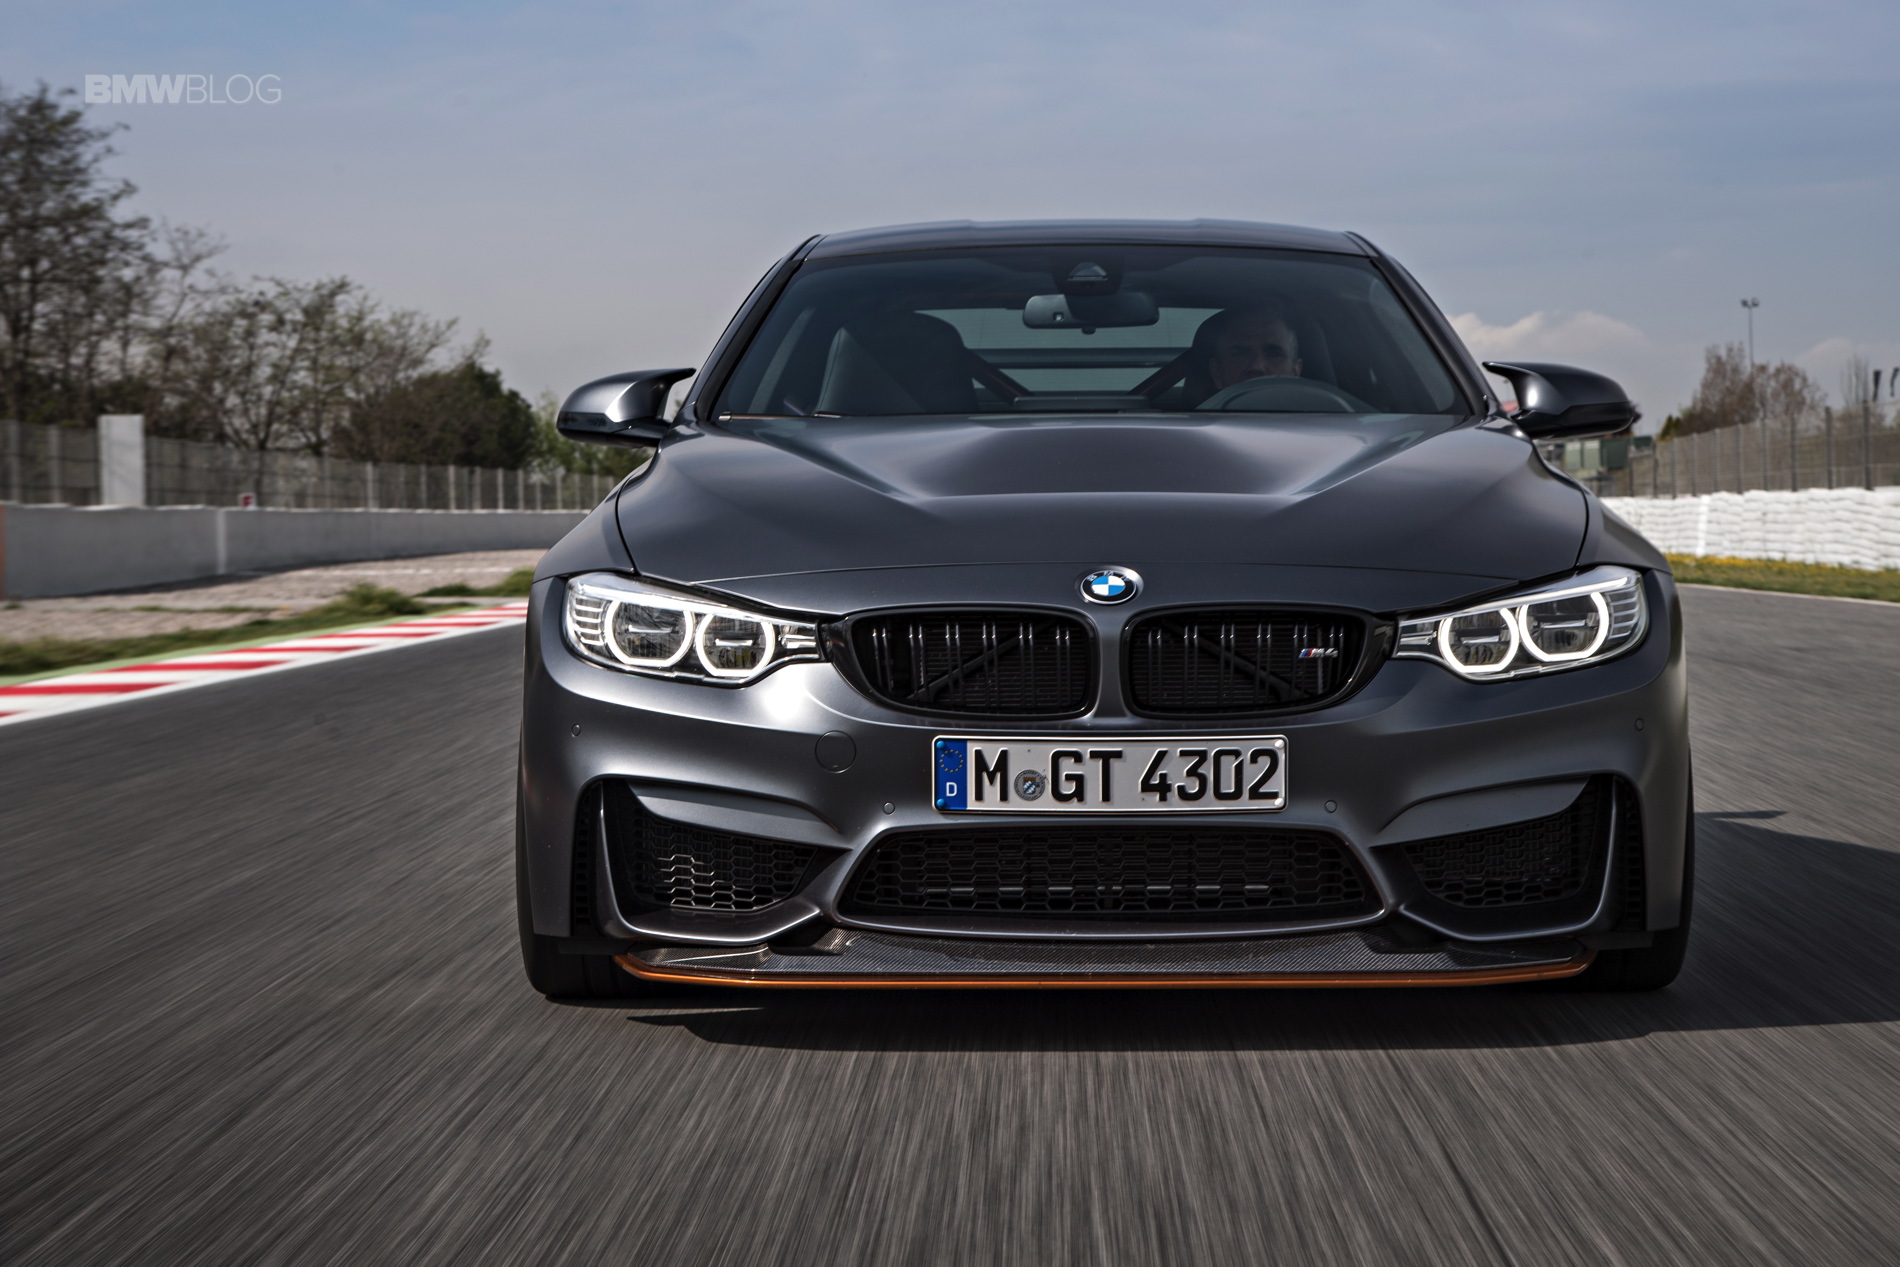 BMW M4 GTS\u002639;s water injection system to be featured on other cars